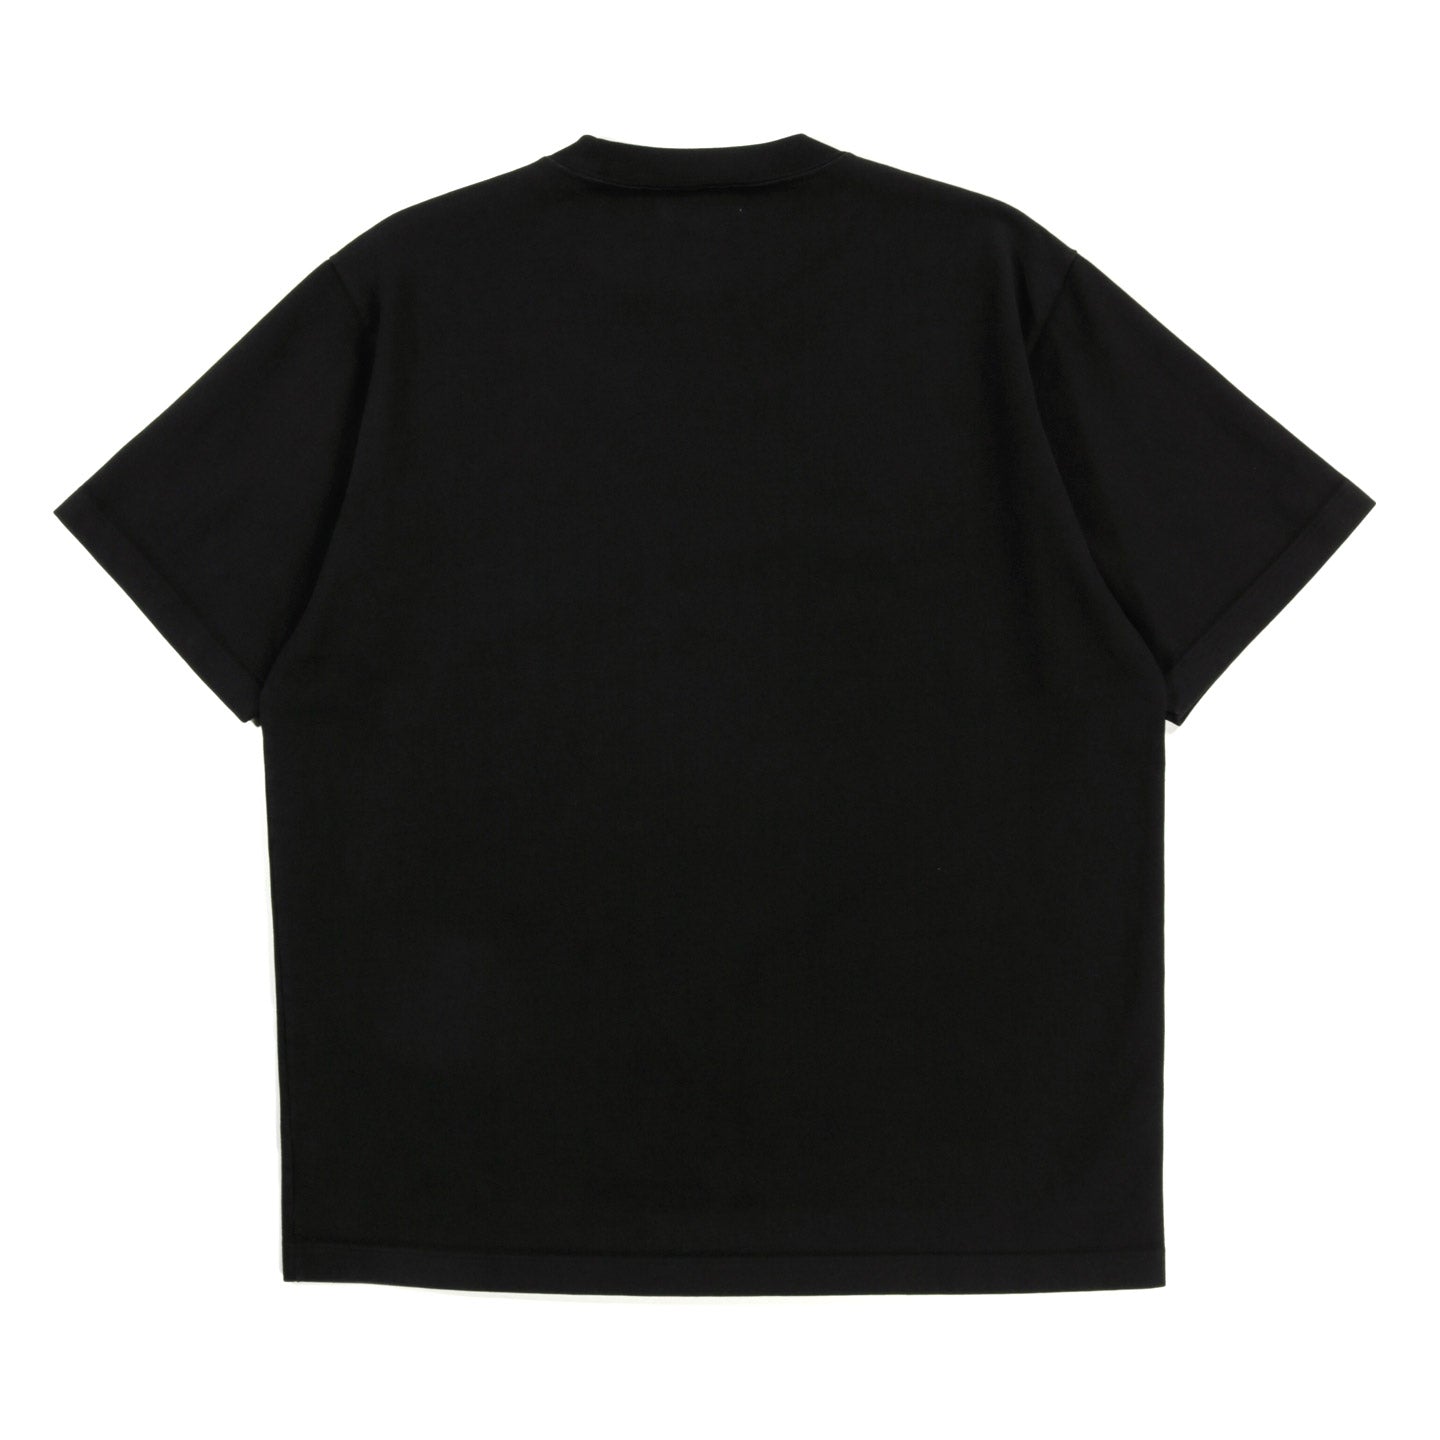 LADY WHITE CO. RUGBY T-SHIRT BLACK